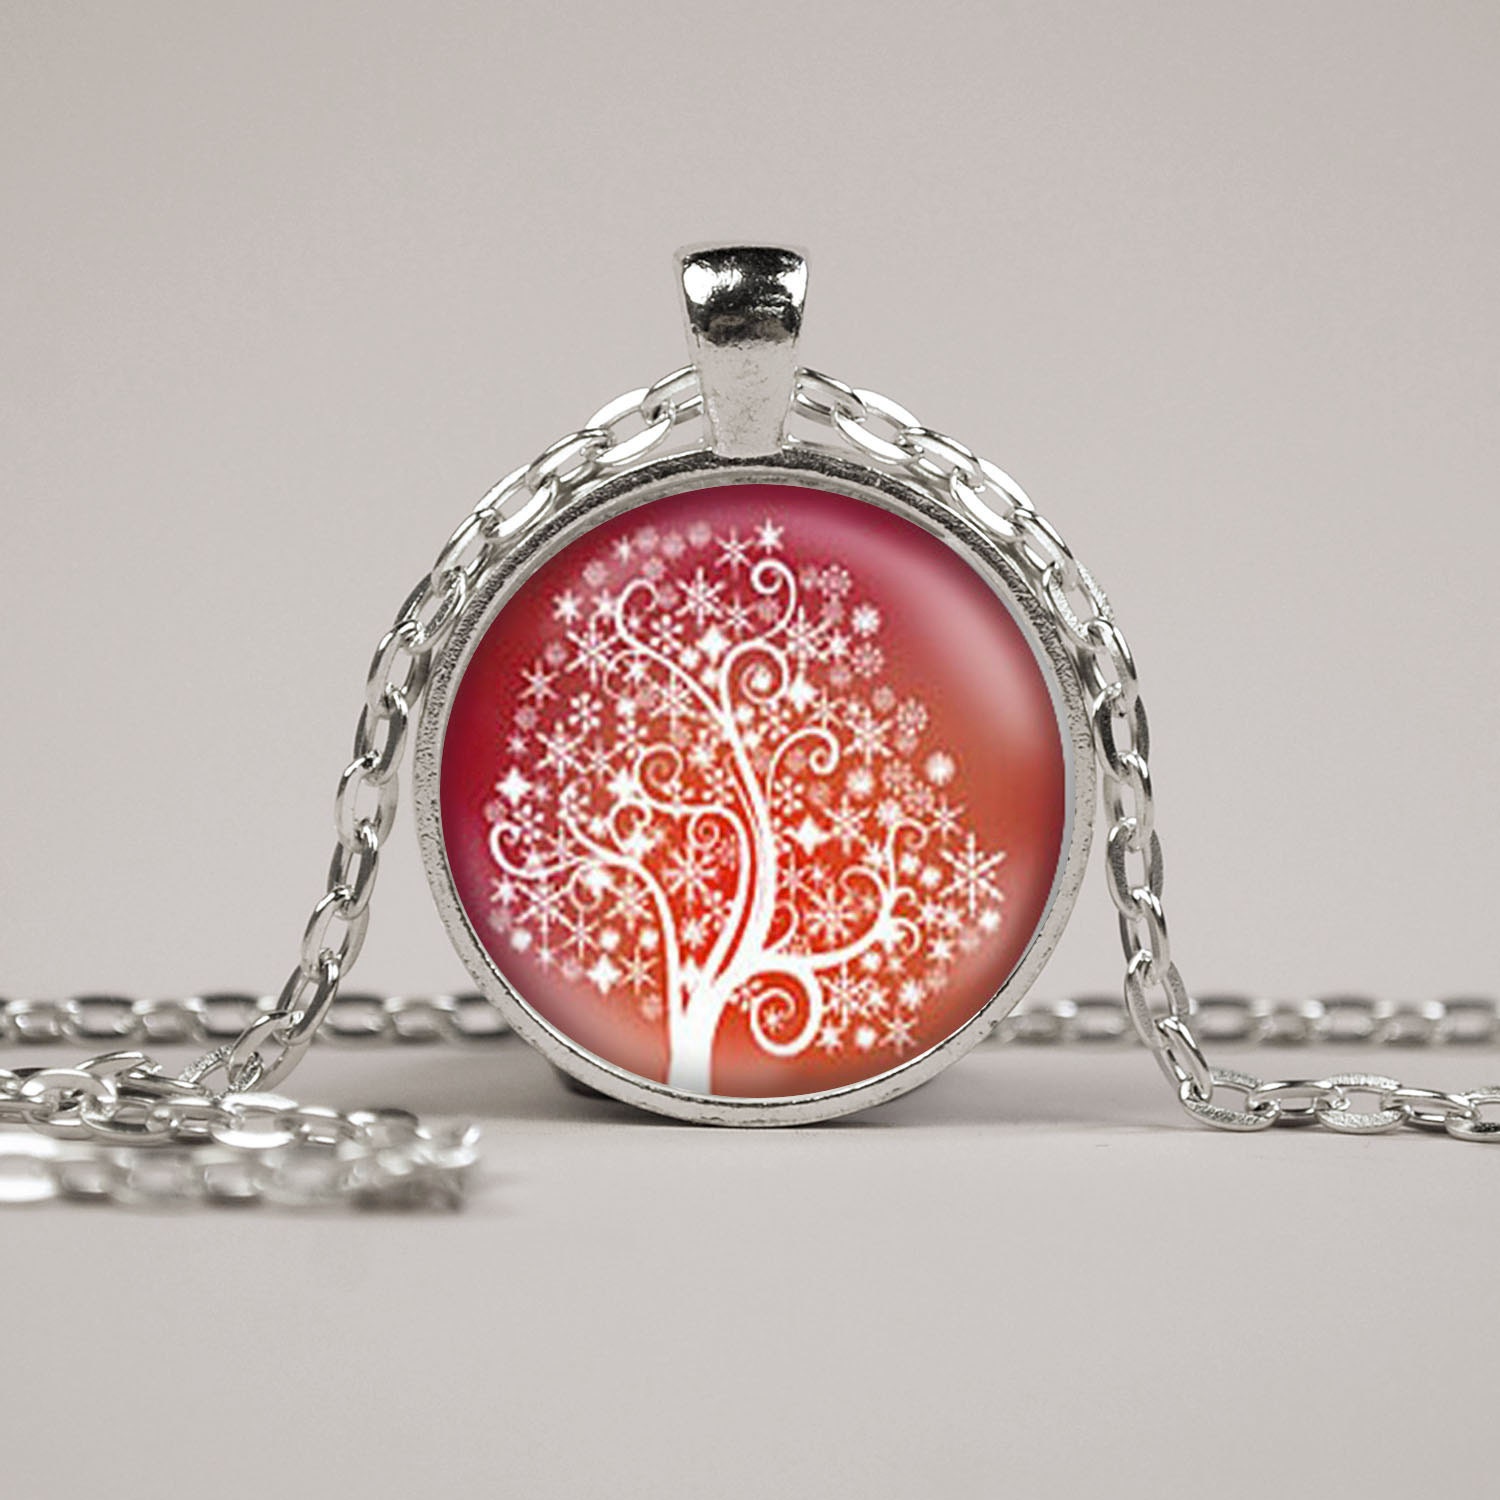 Red and White Snowflake Tree Pendant Necklace or Keyring Glass Art Print Jewelry Charm Gifts for Her or Him Tree of Life Christmas